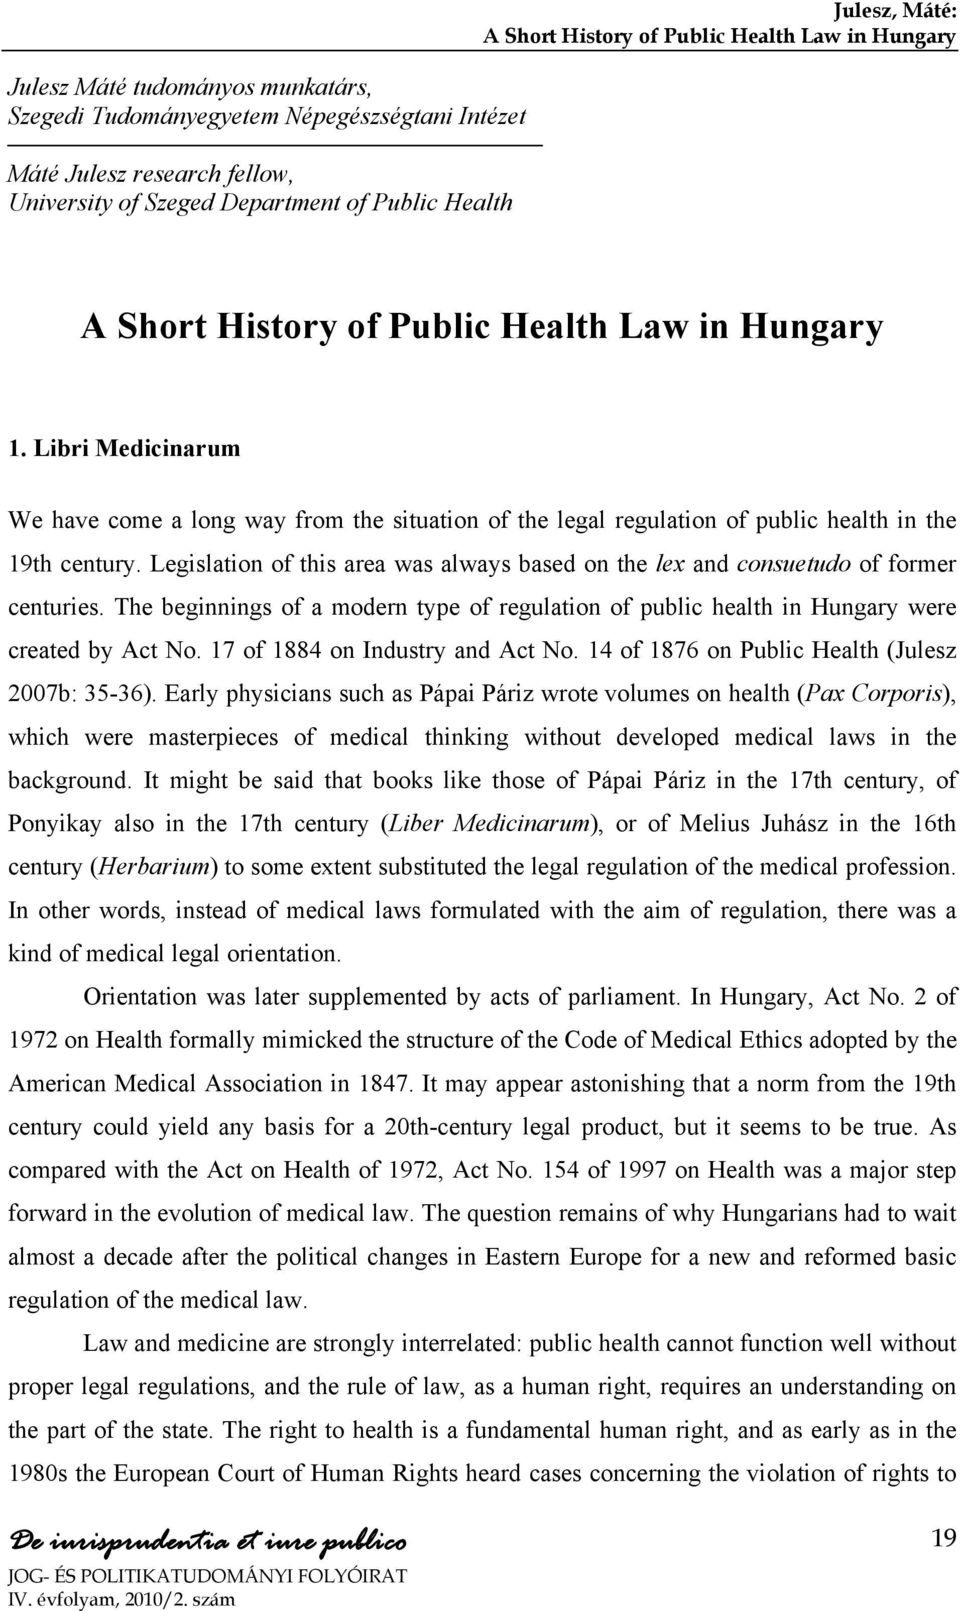 Legislation of this area was always based on the lex and consuetudo of former centuries. The beginnings of a modern type of regulation of public health in Hungary were created by Act No.